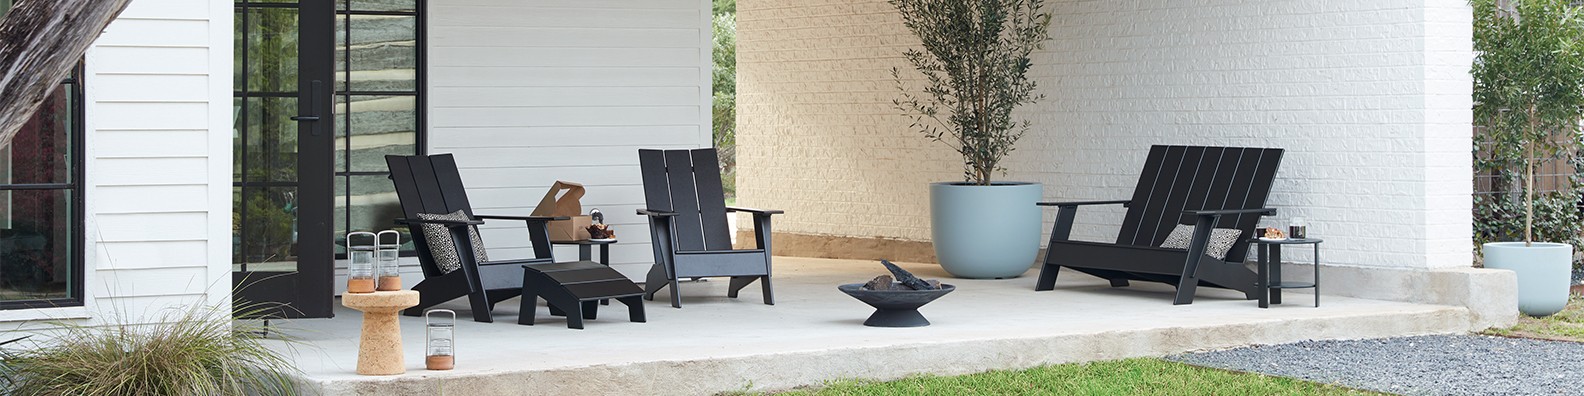 Design Within Reach Linkedin, Design Within Reach Outdoor Dining Chairs